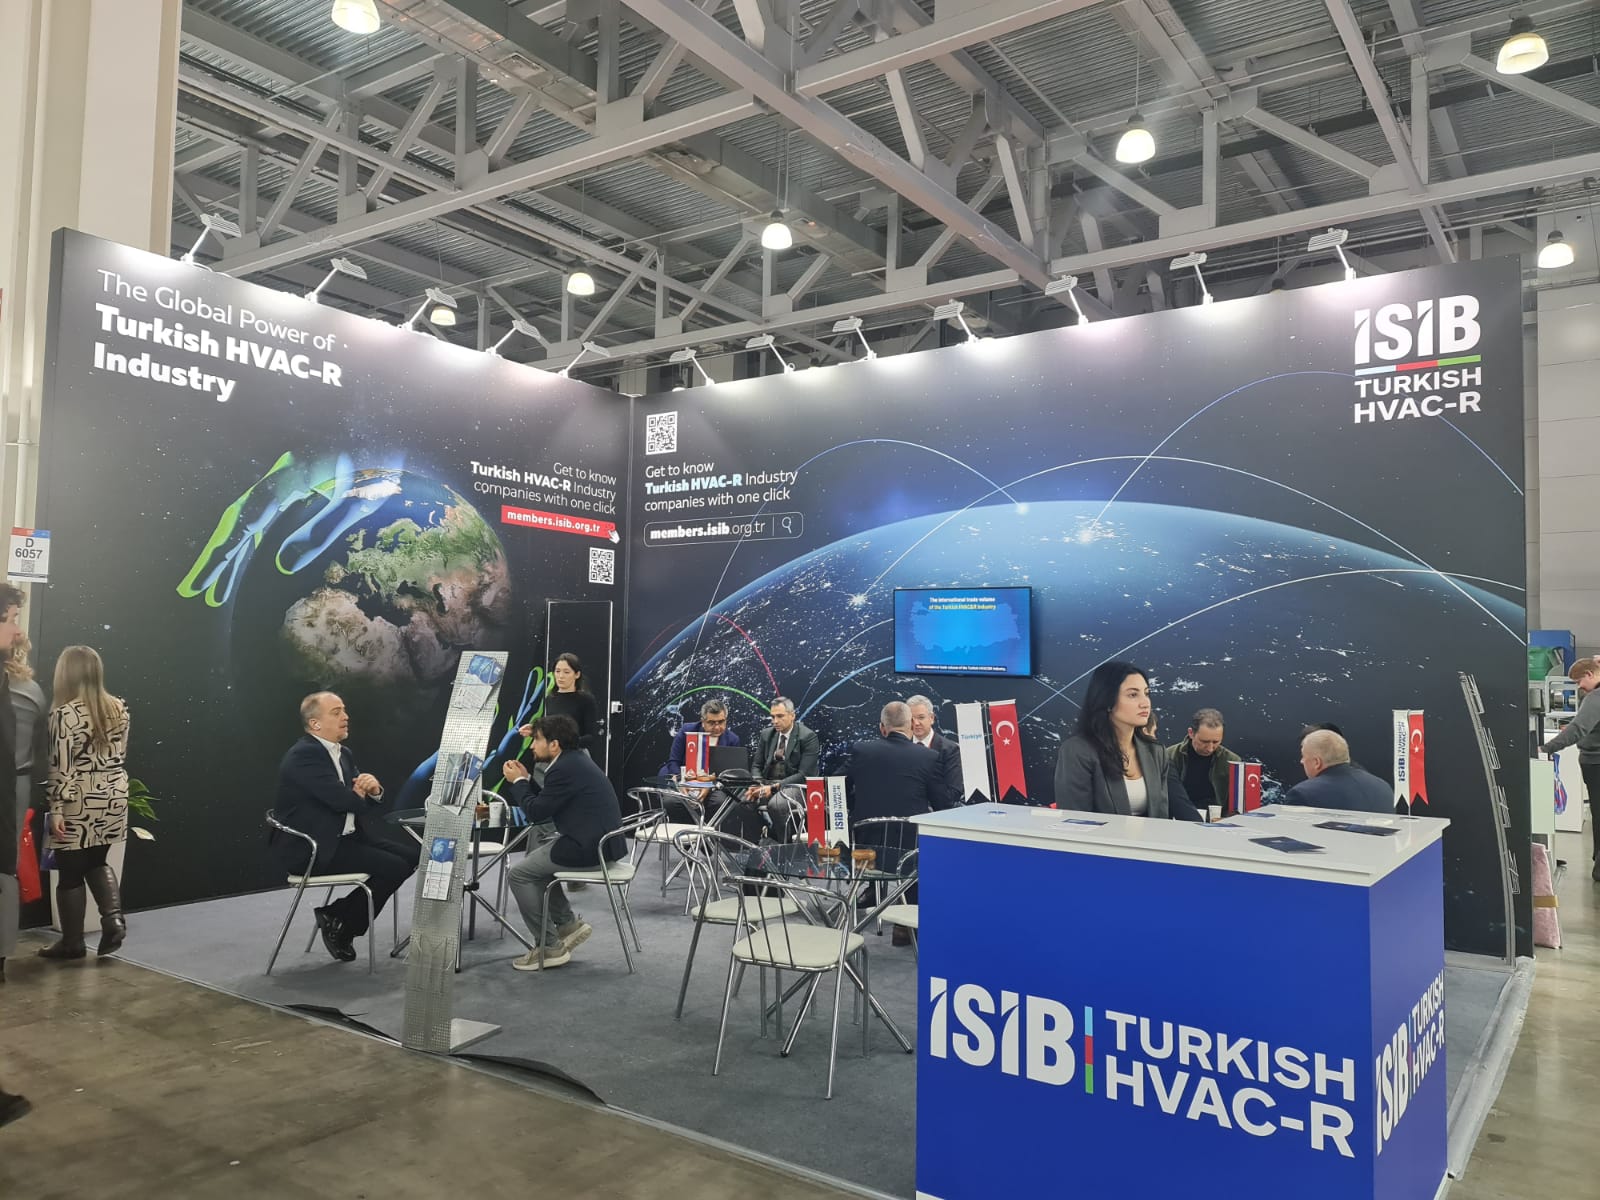 Turkish HVAC-R Industry Participates Significantly in Exhibitions in Russia - 8